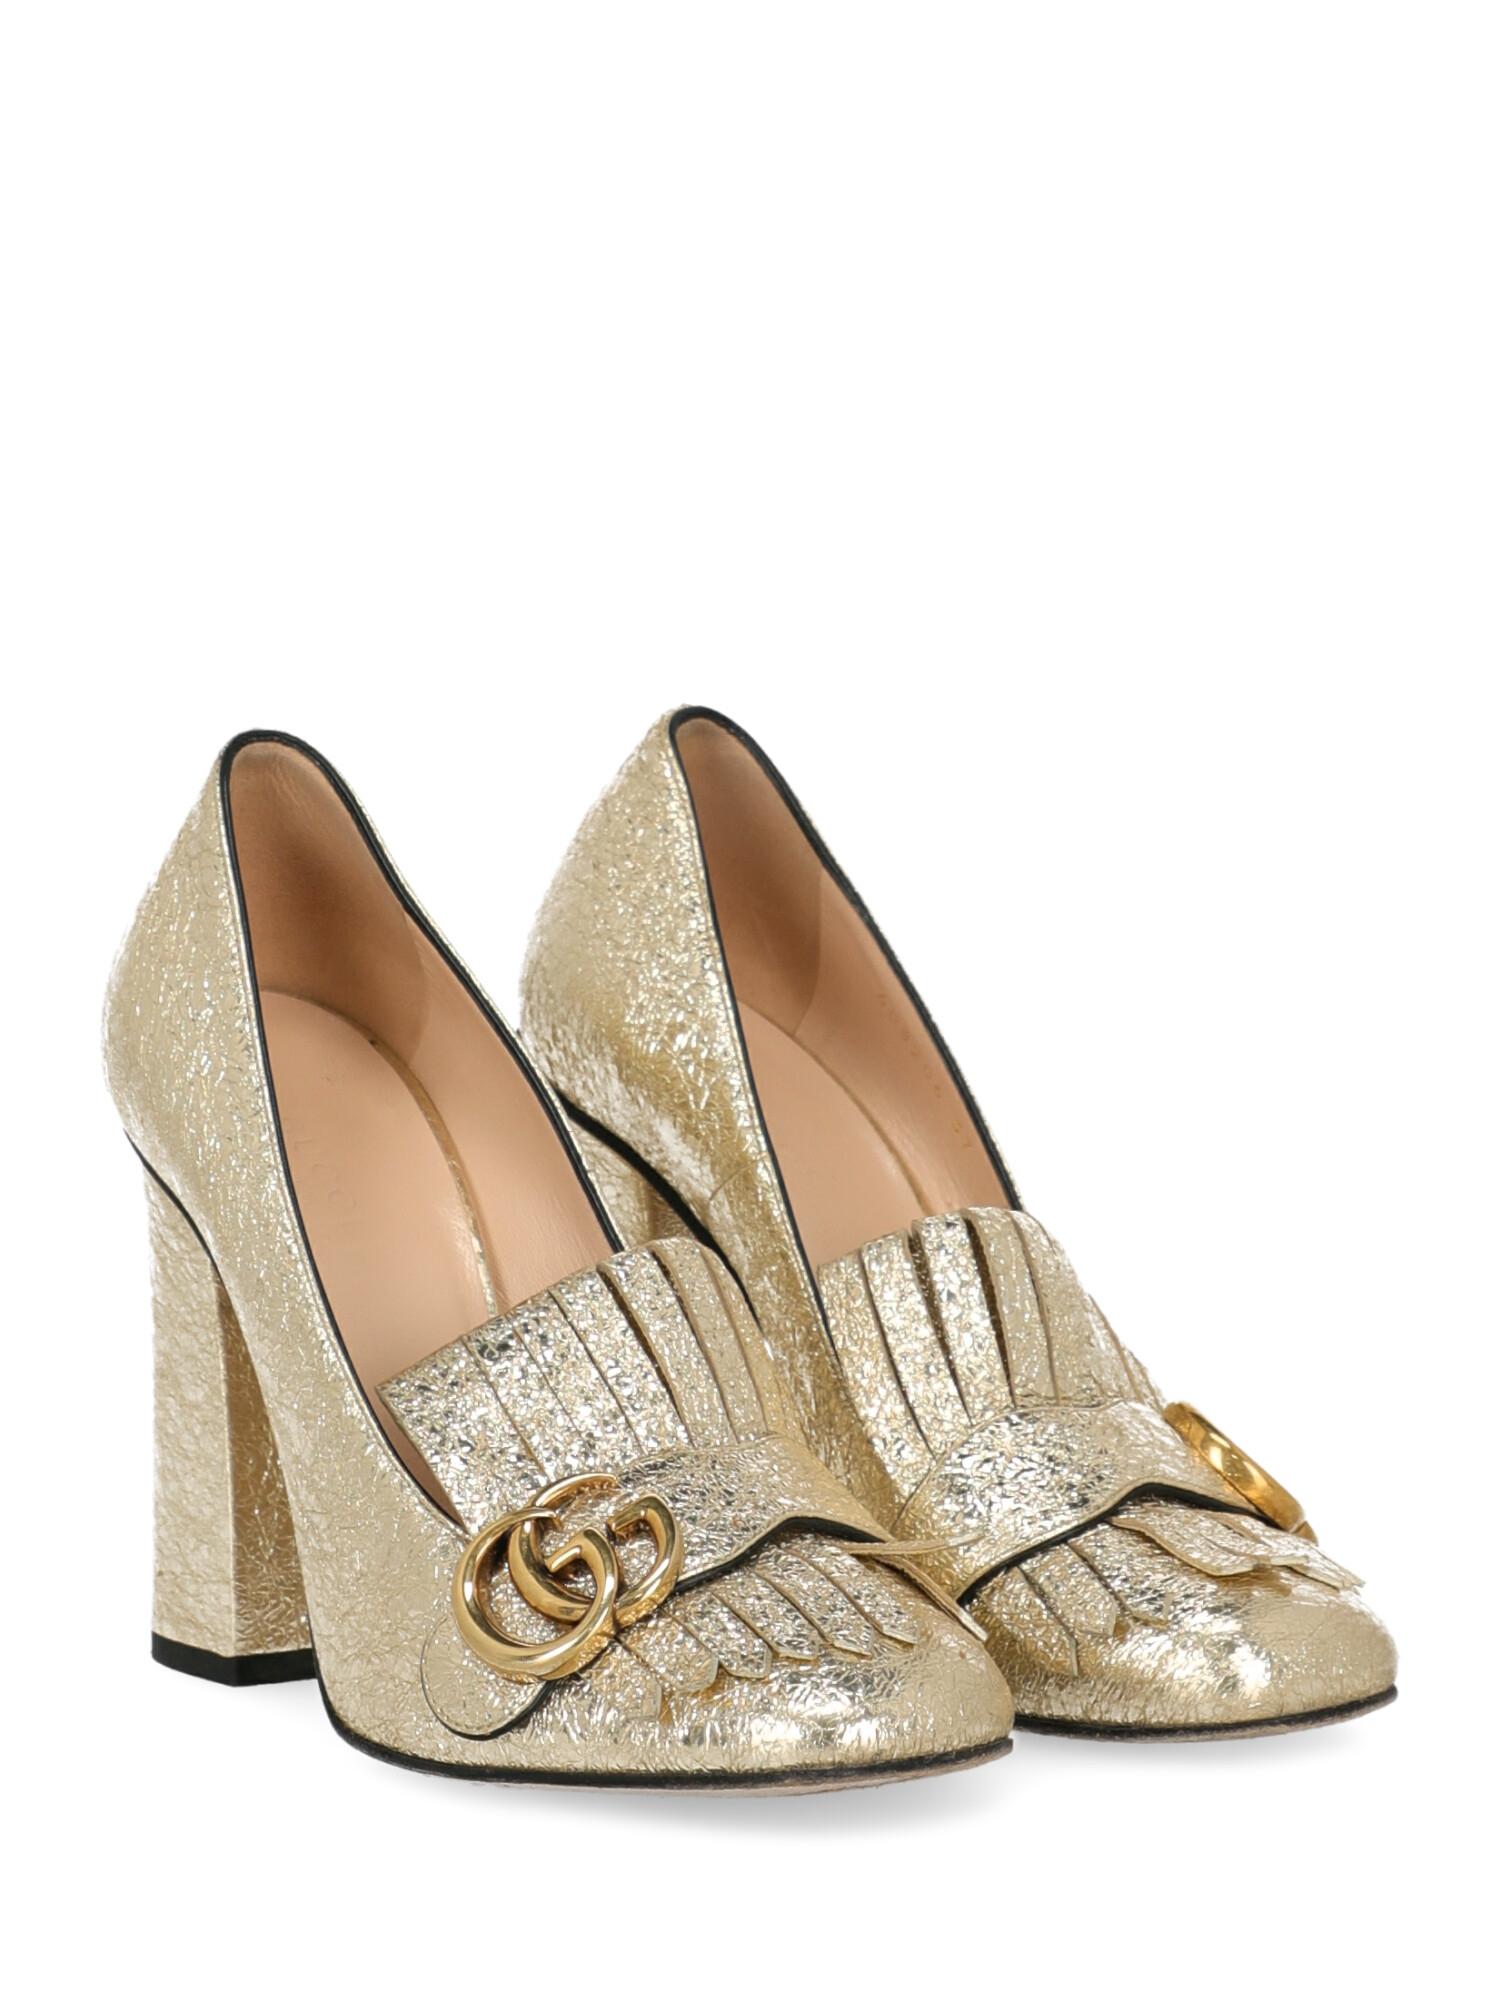 Shoe, leather, solid color, crinkle effect, front logo, gold-tone hardware, square toe, branded insole, block heel, high heel, fringe embellishment

Includes:
- Dust bag

Product Condition: Very Good
Heel: slightly visible scratches. Sole: visible